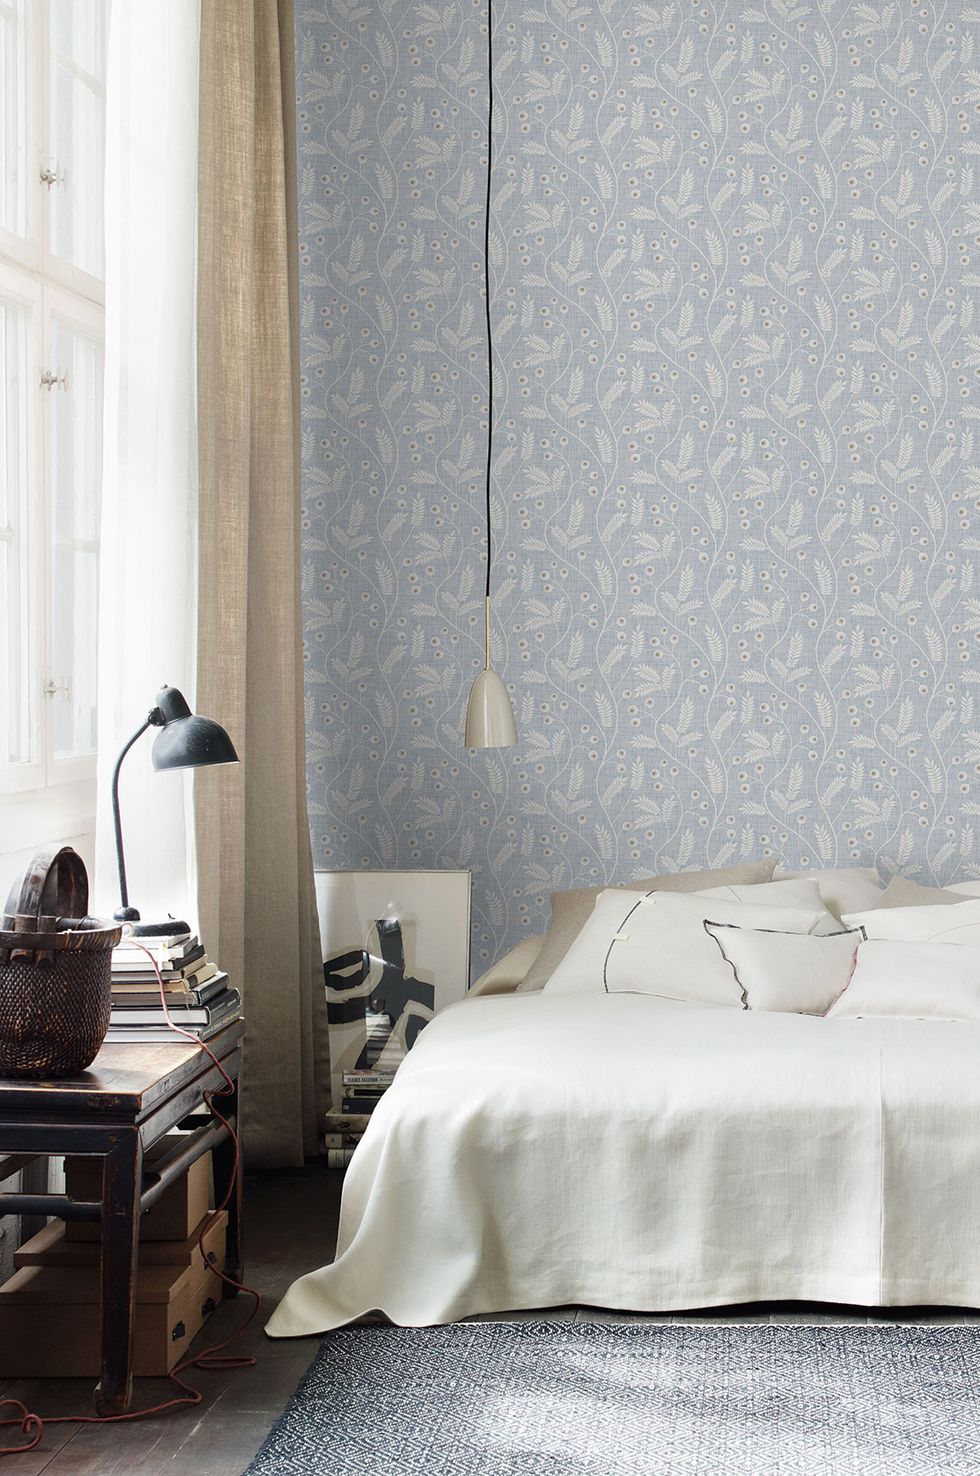 10 Wallpapers That Will Transform Your Bedroom in the Blink of an Eye